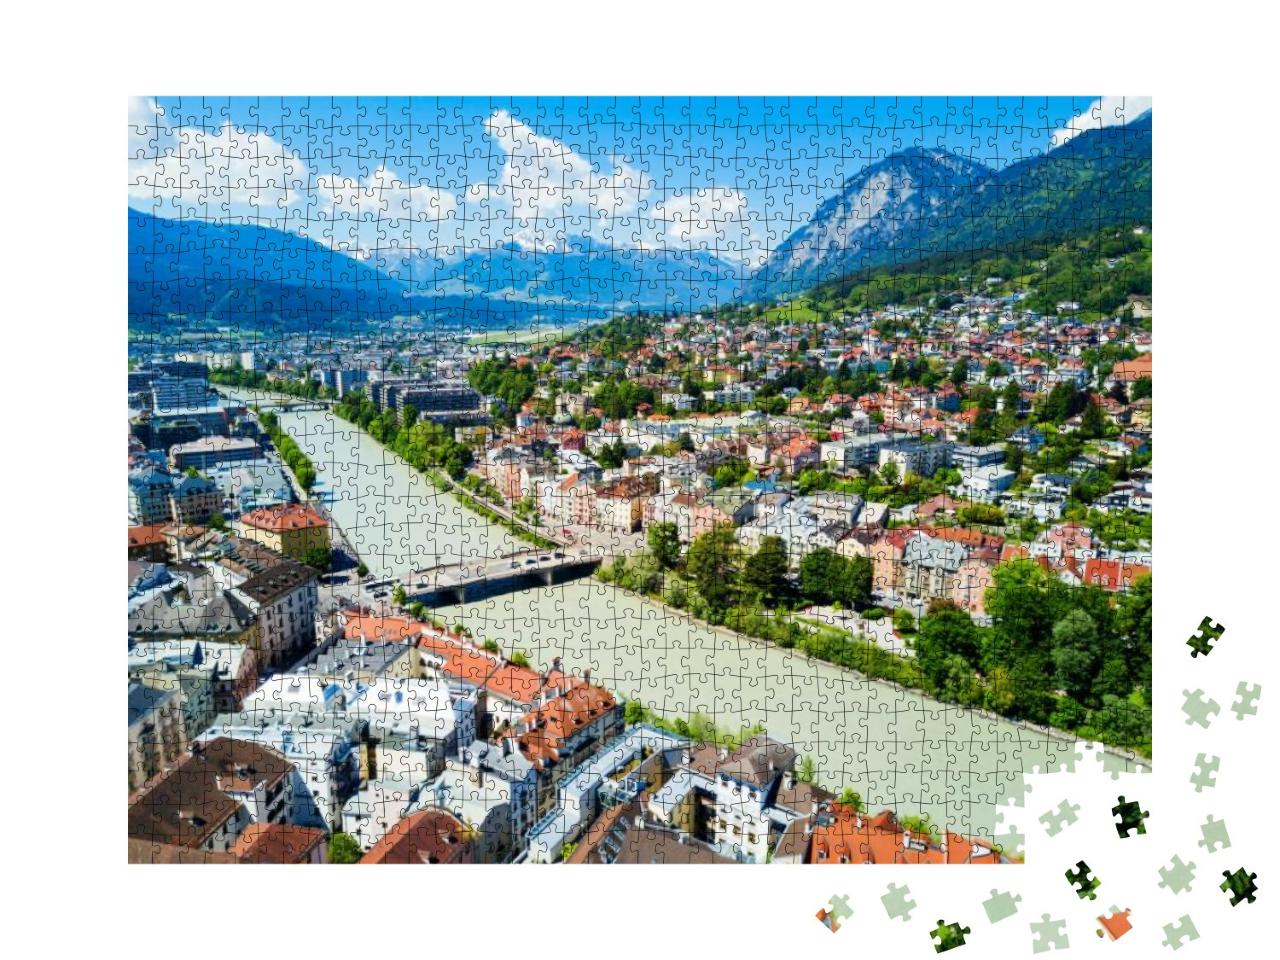 Inns River & Innsbruck City Center Aerial Panoramic View... Jigsaw Puzzle with 1000 pieces